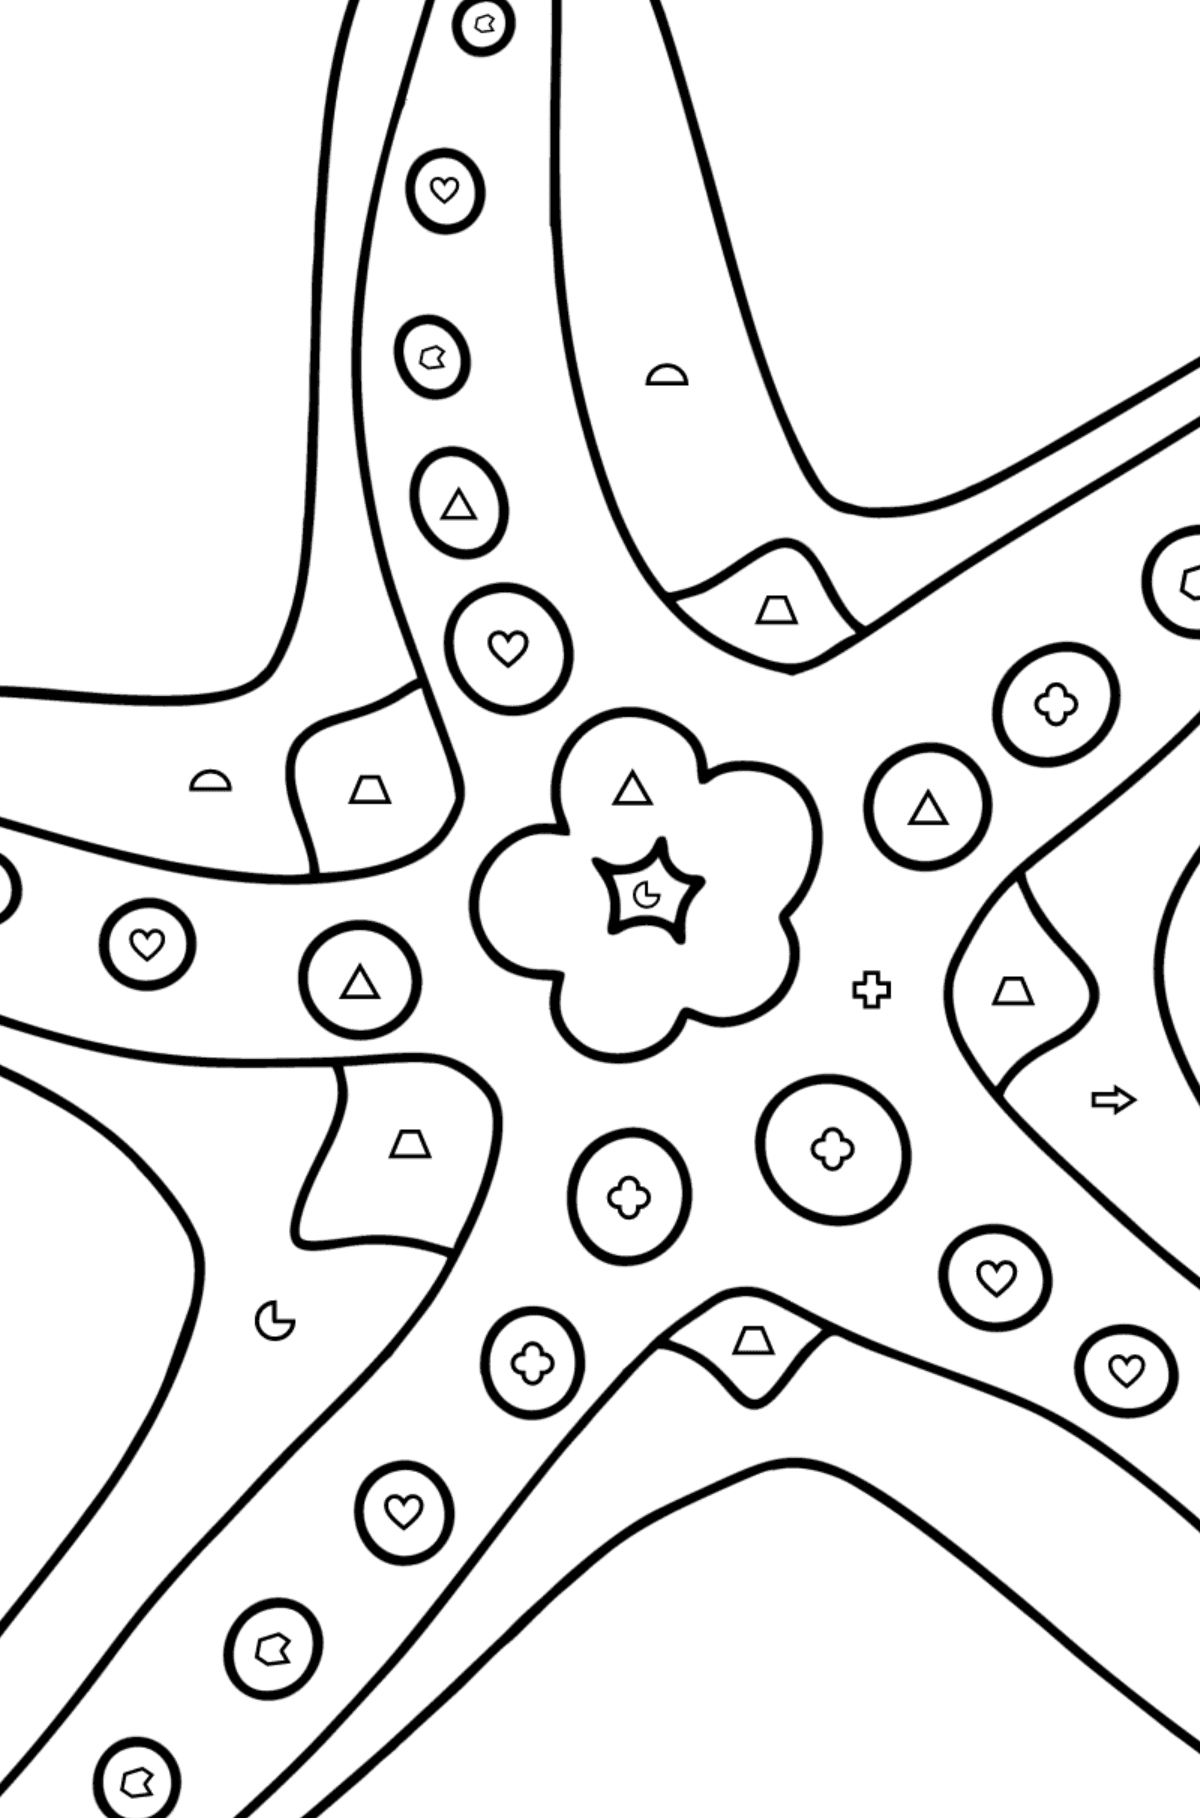 Starfish coloring page - Coloring by Geometric Shapes for Kids